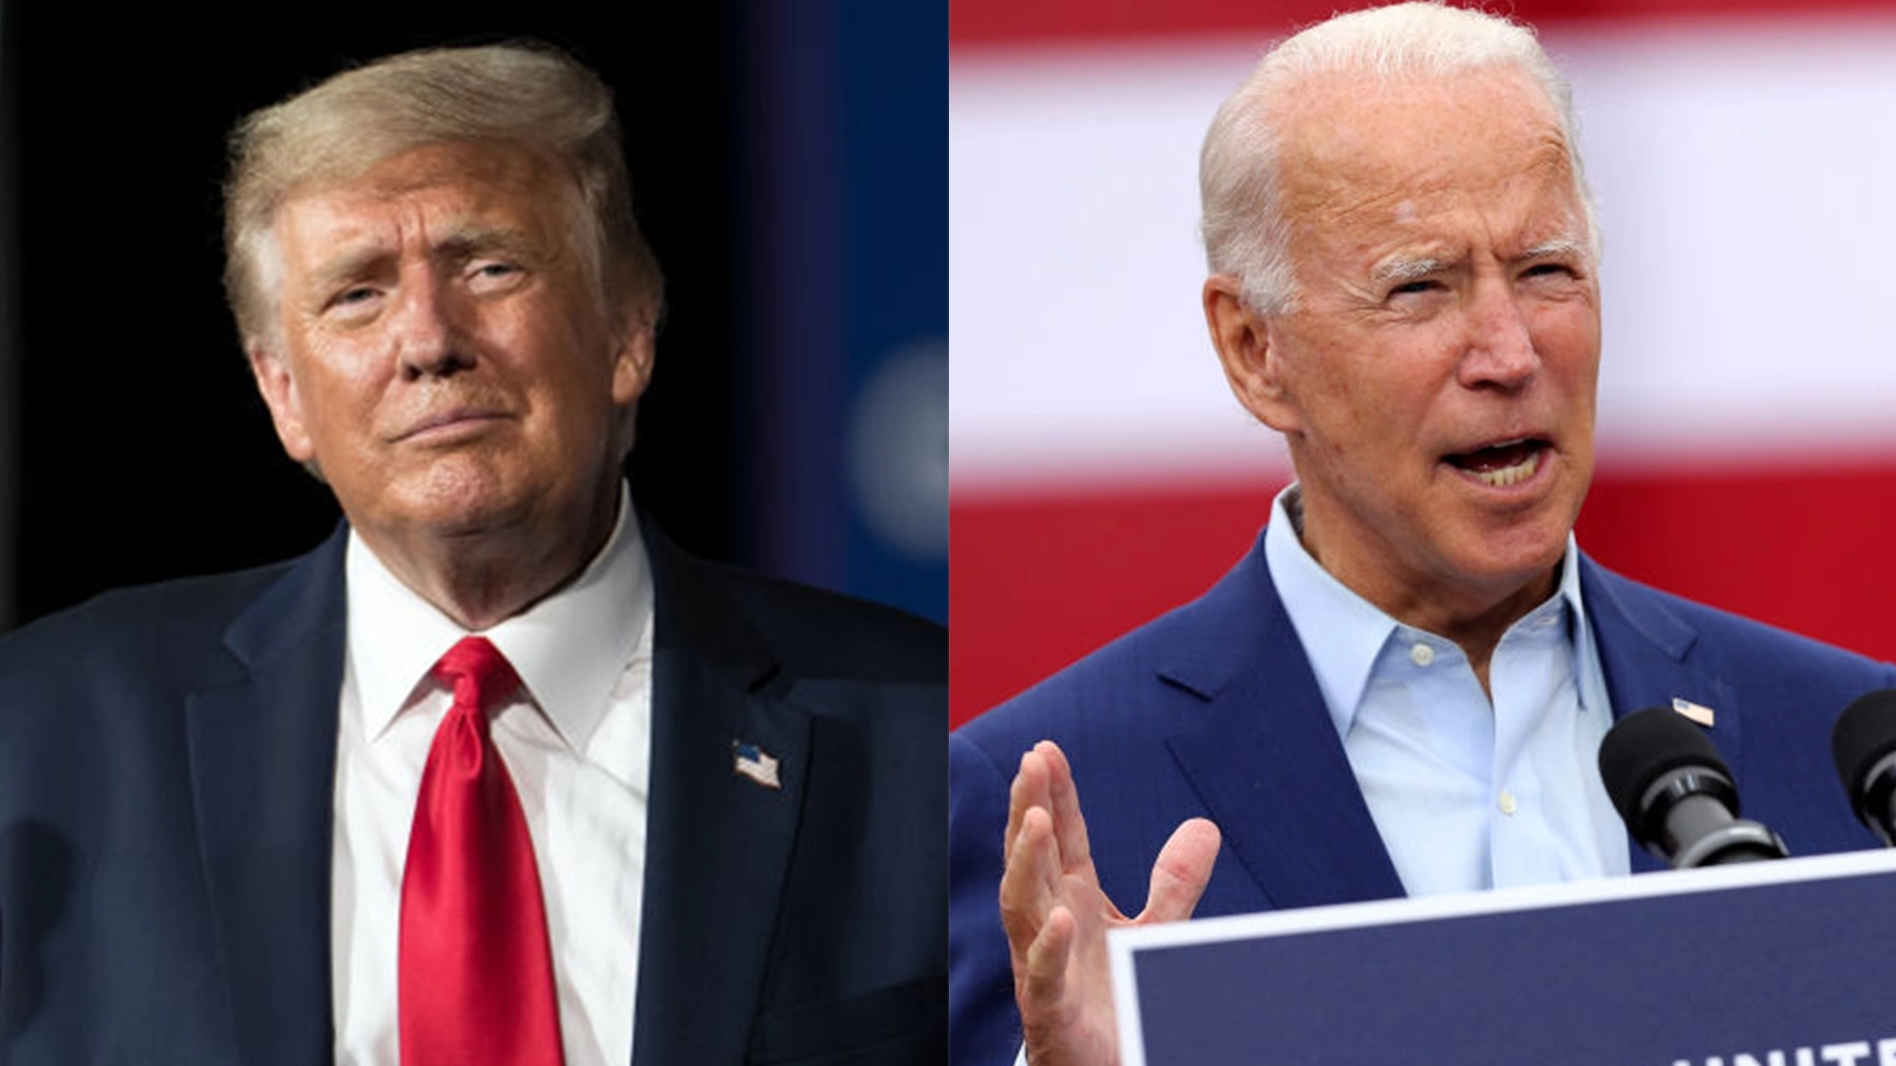 Trump – Biden’s upcoming debate in dueling town hall meetings instead of face-to-face